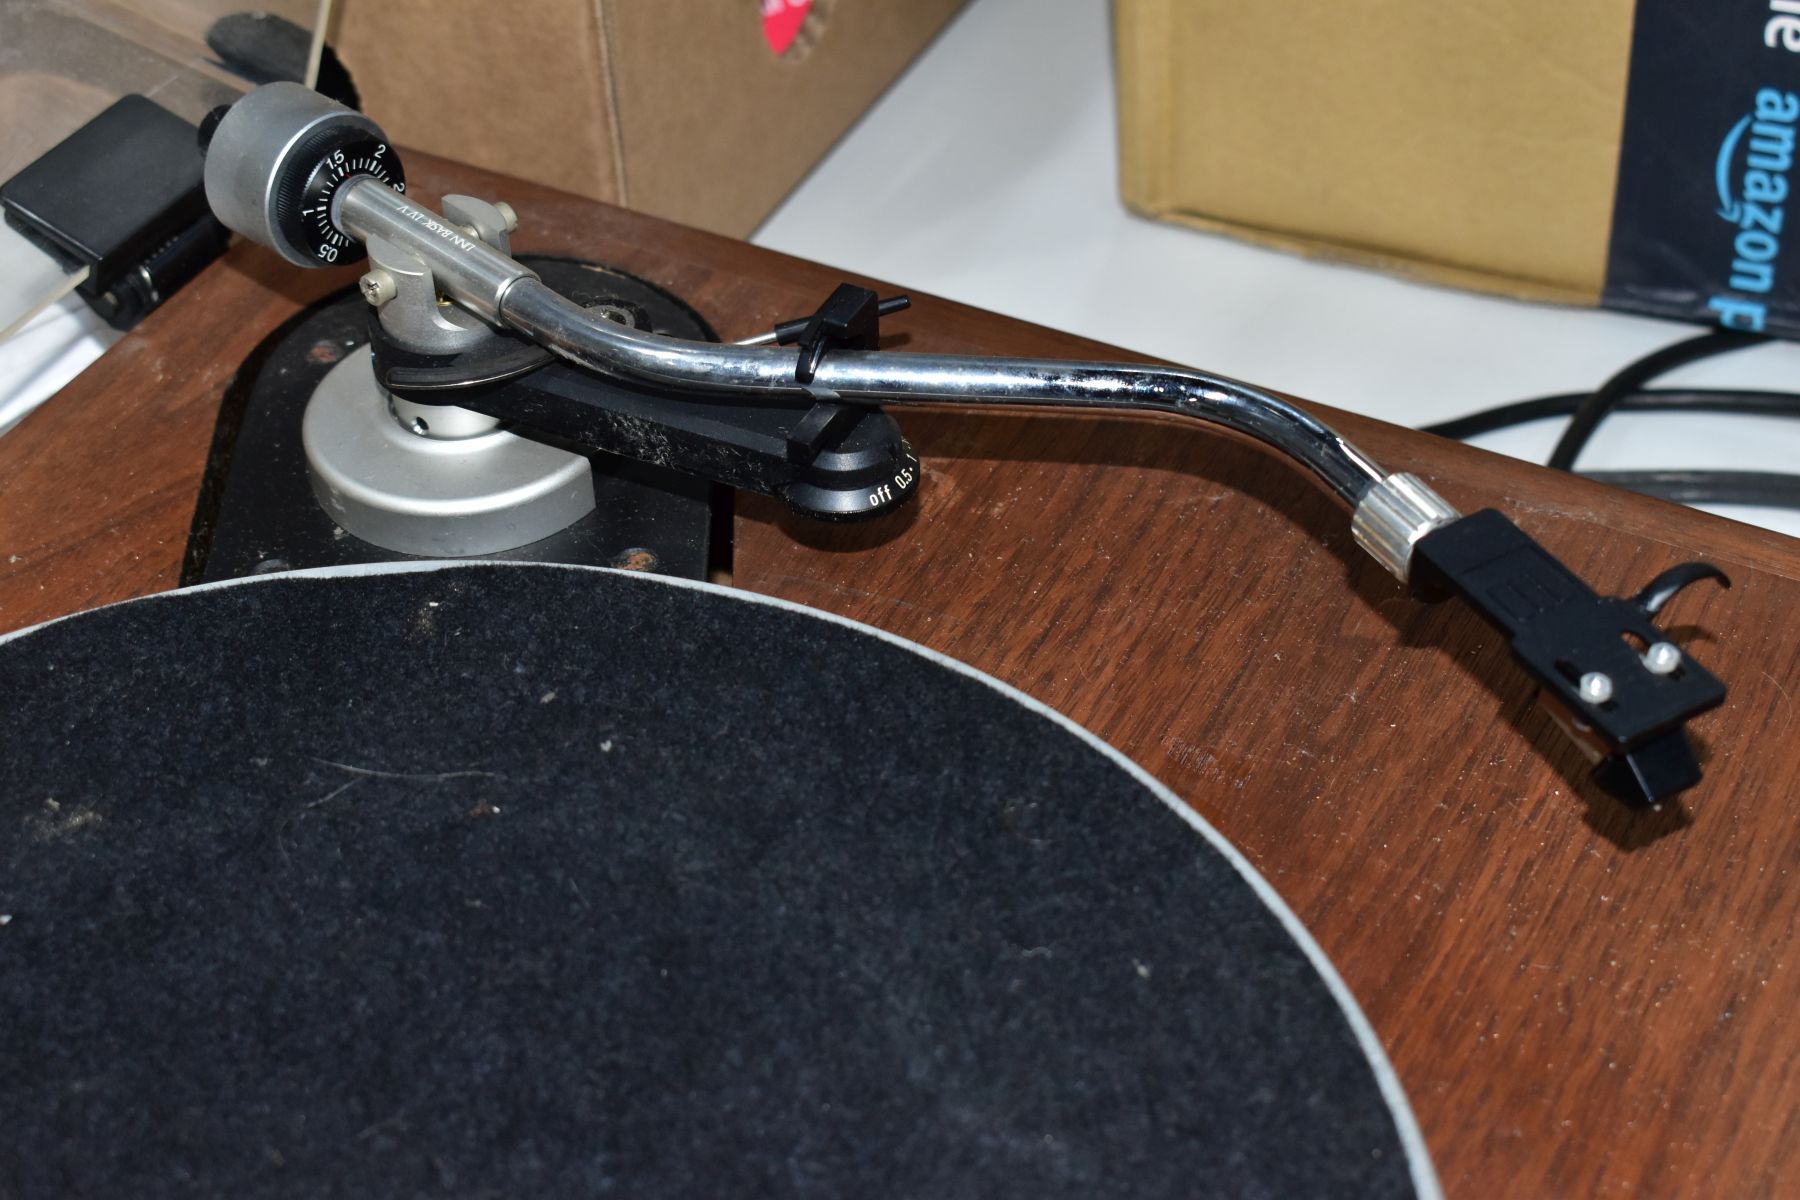 A TELEDYNE ACOUSTIC RESEARCH THE AR TURNTABLE with walnut plinth, two cartridge heads one with an - Bild 4 aus 8